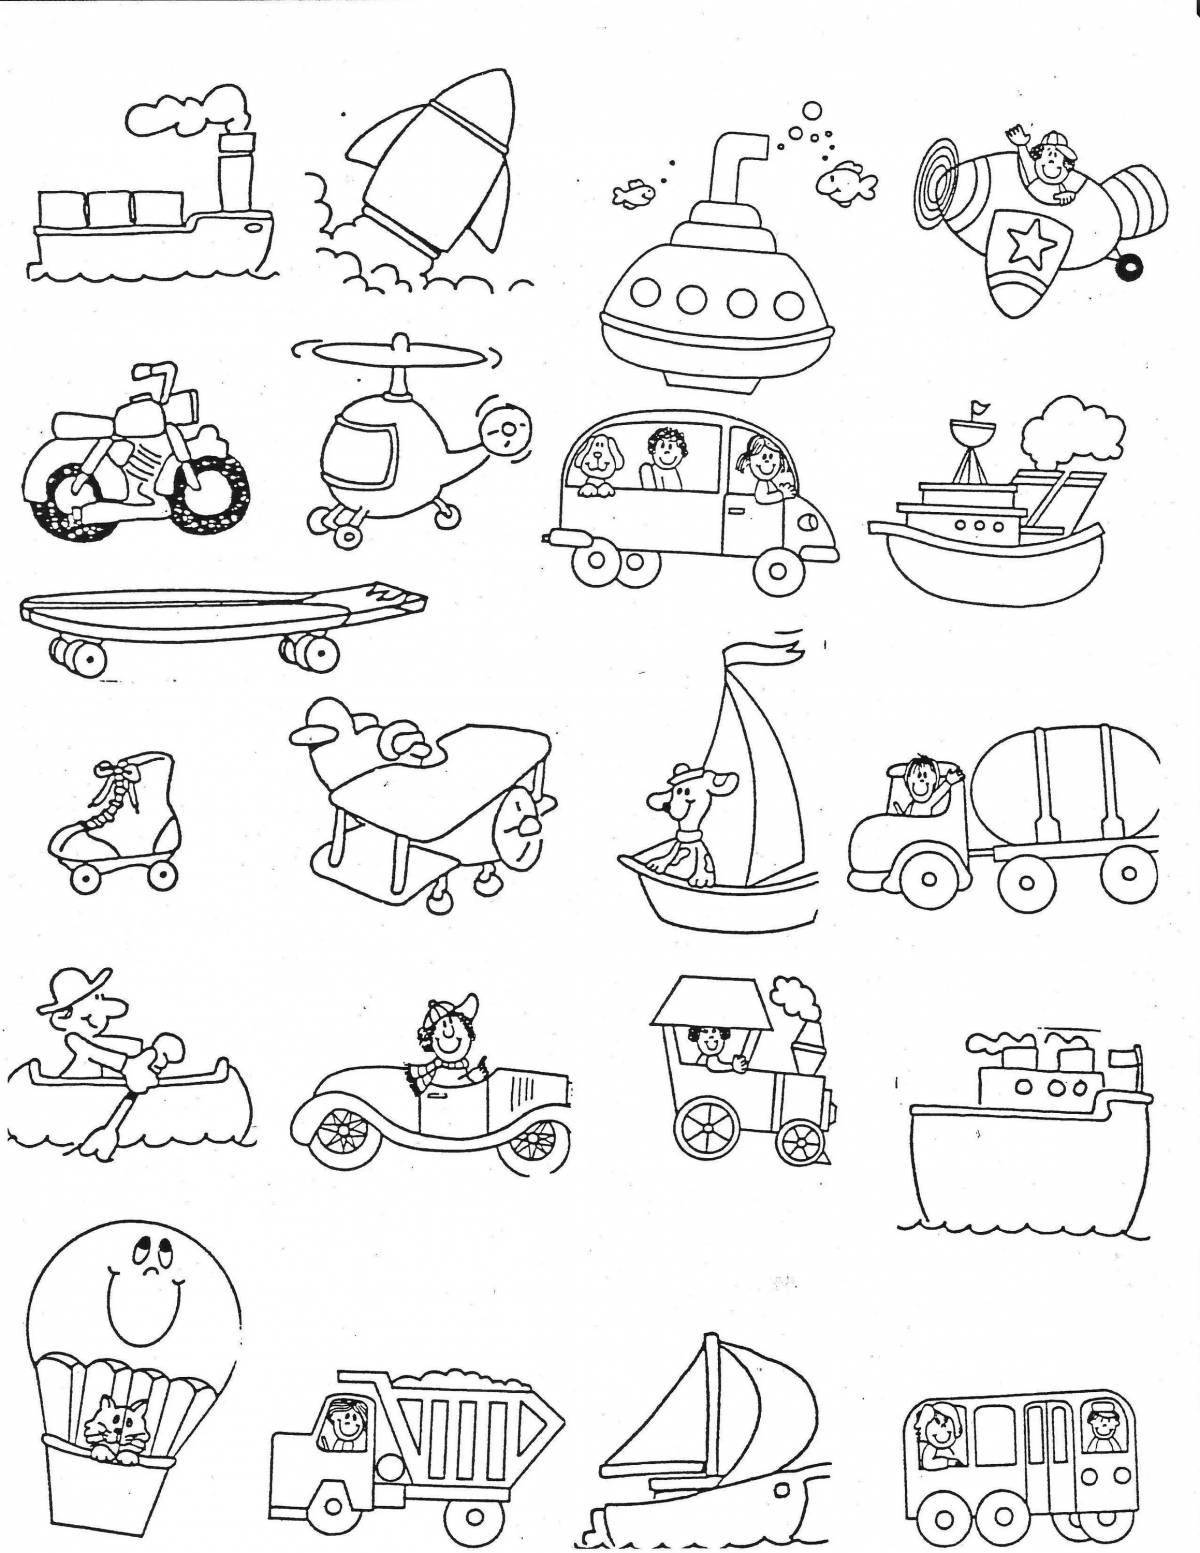 Fairytale coloring book for preschoolers modes of transport